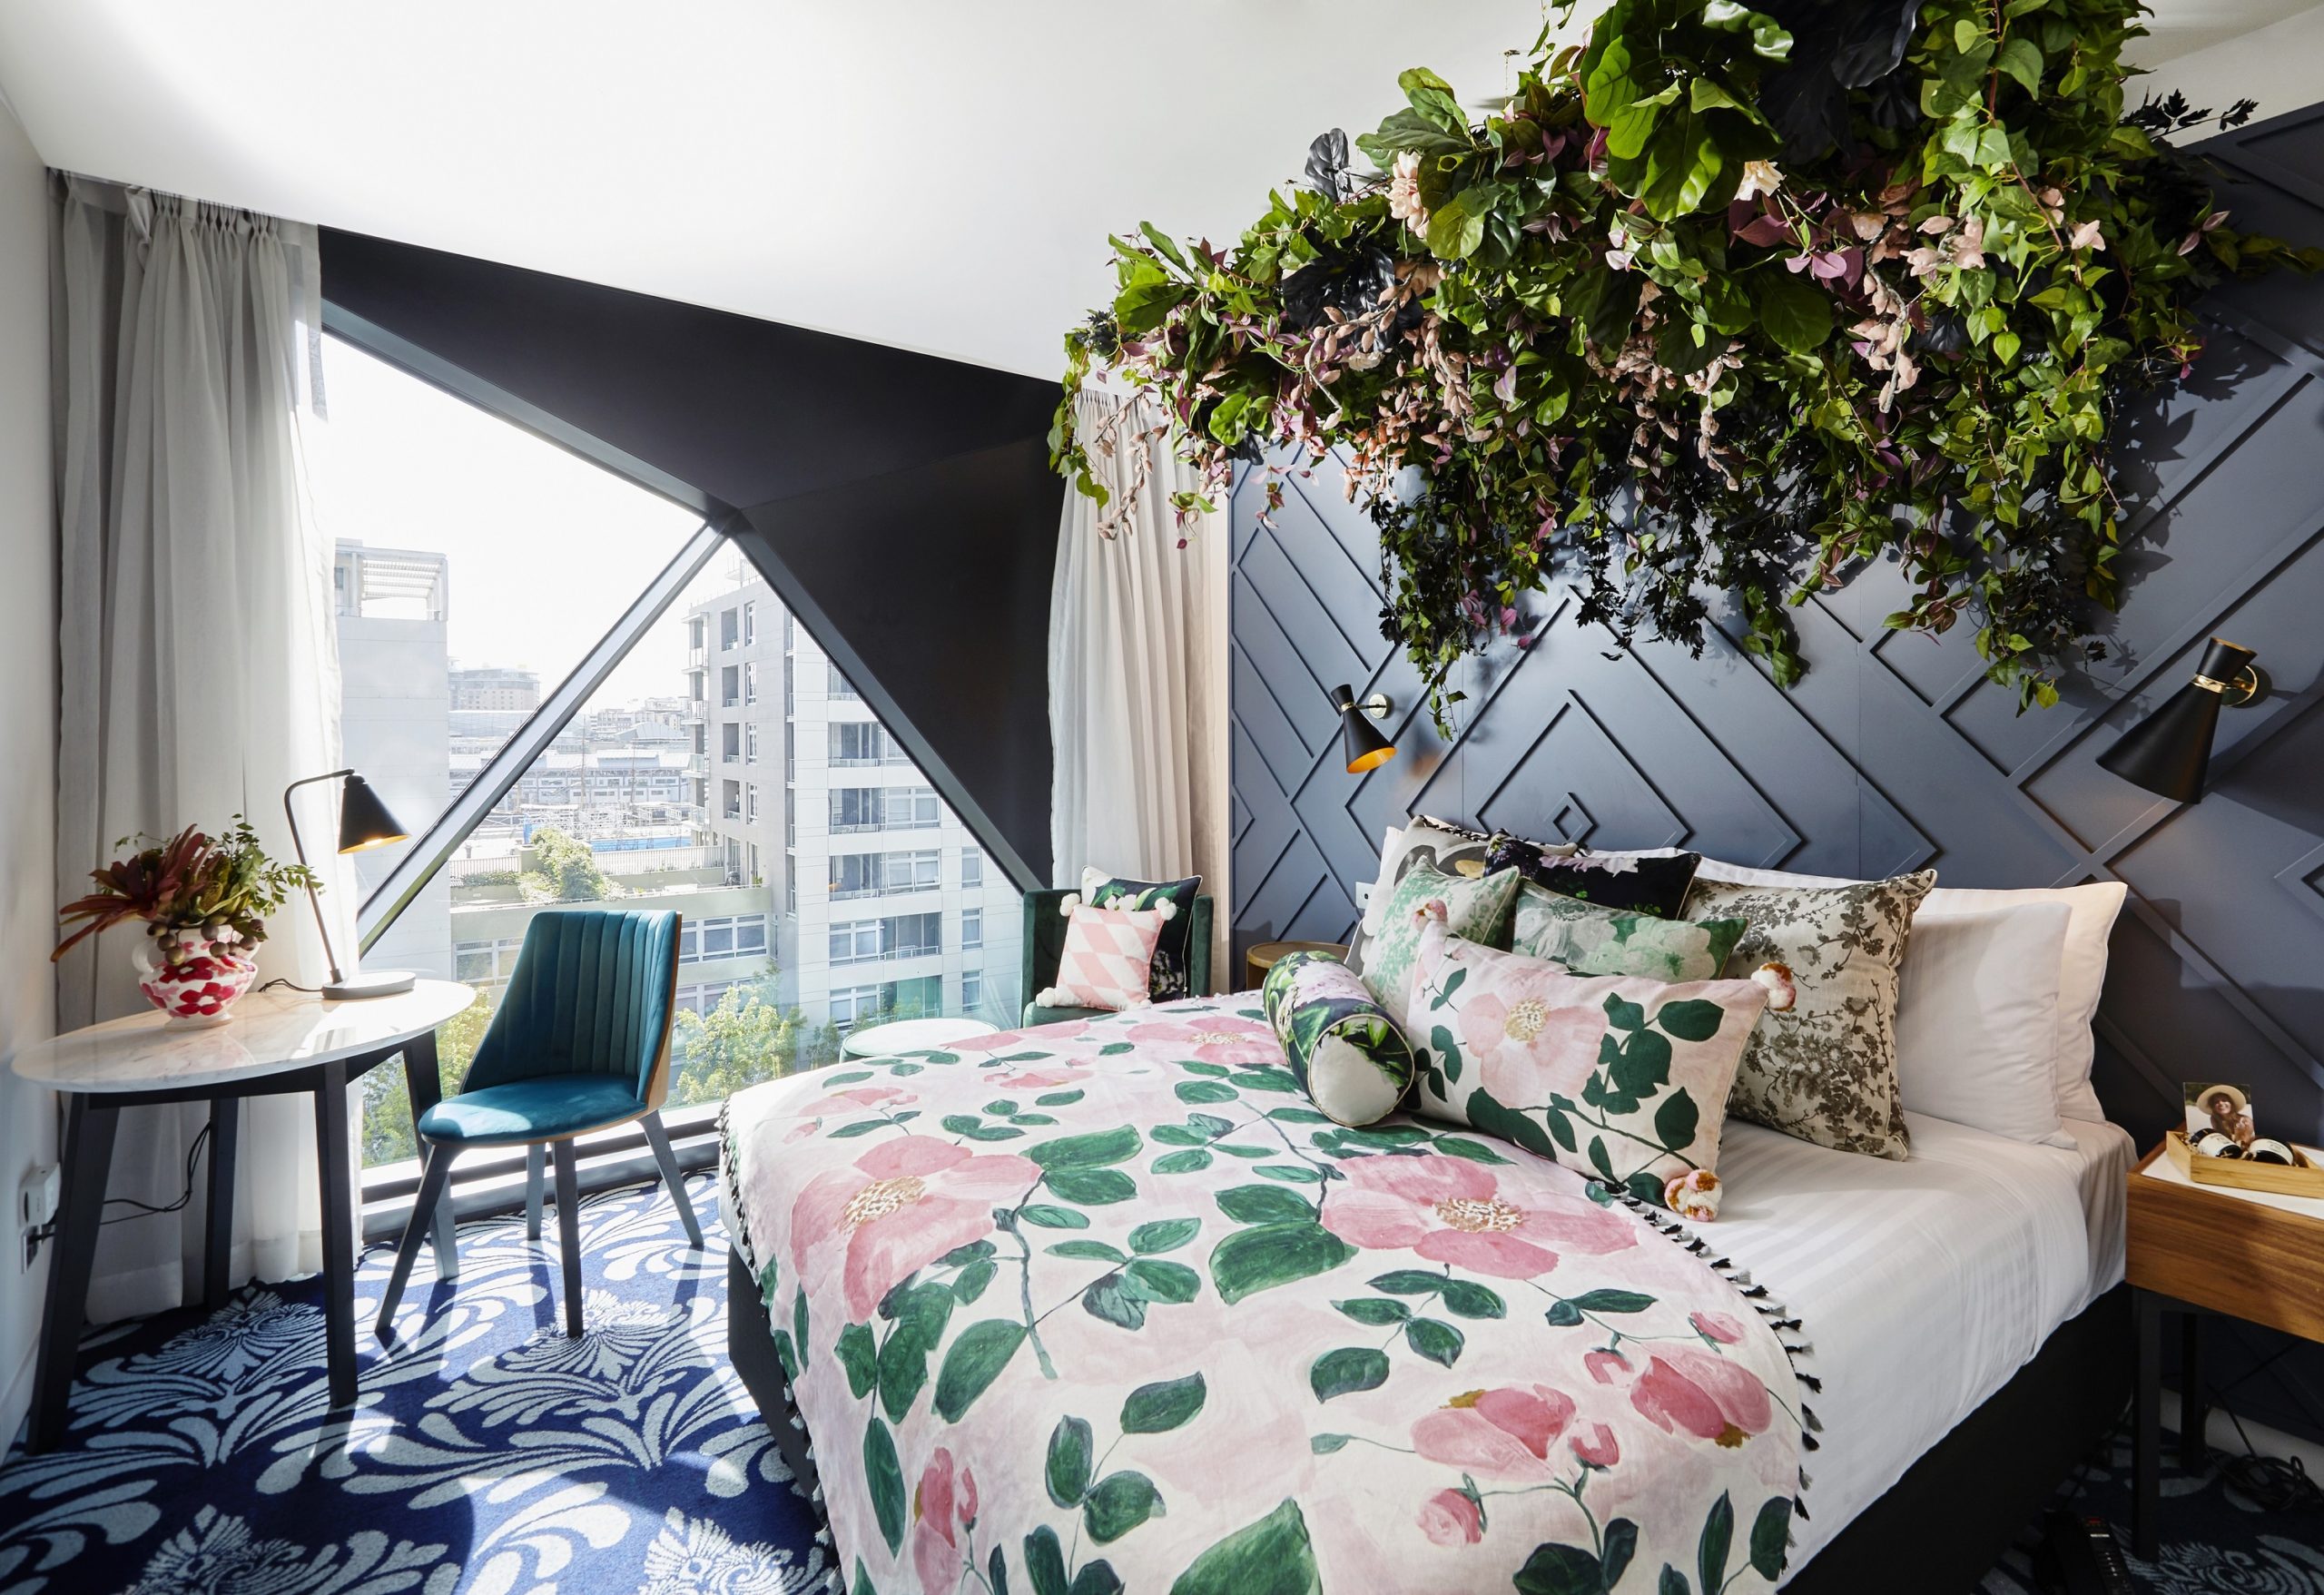 This Boutique Hotel In Sydney Uses Botanics To Transform Their